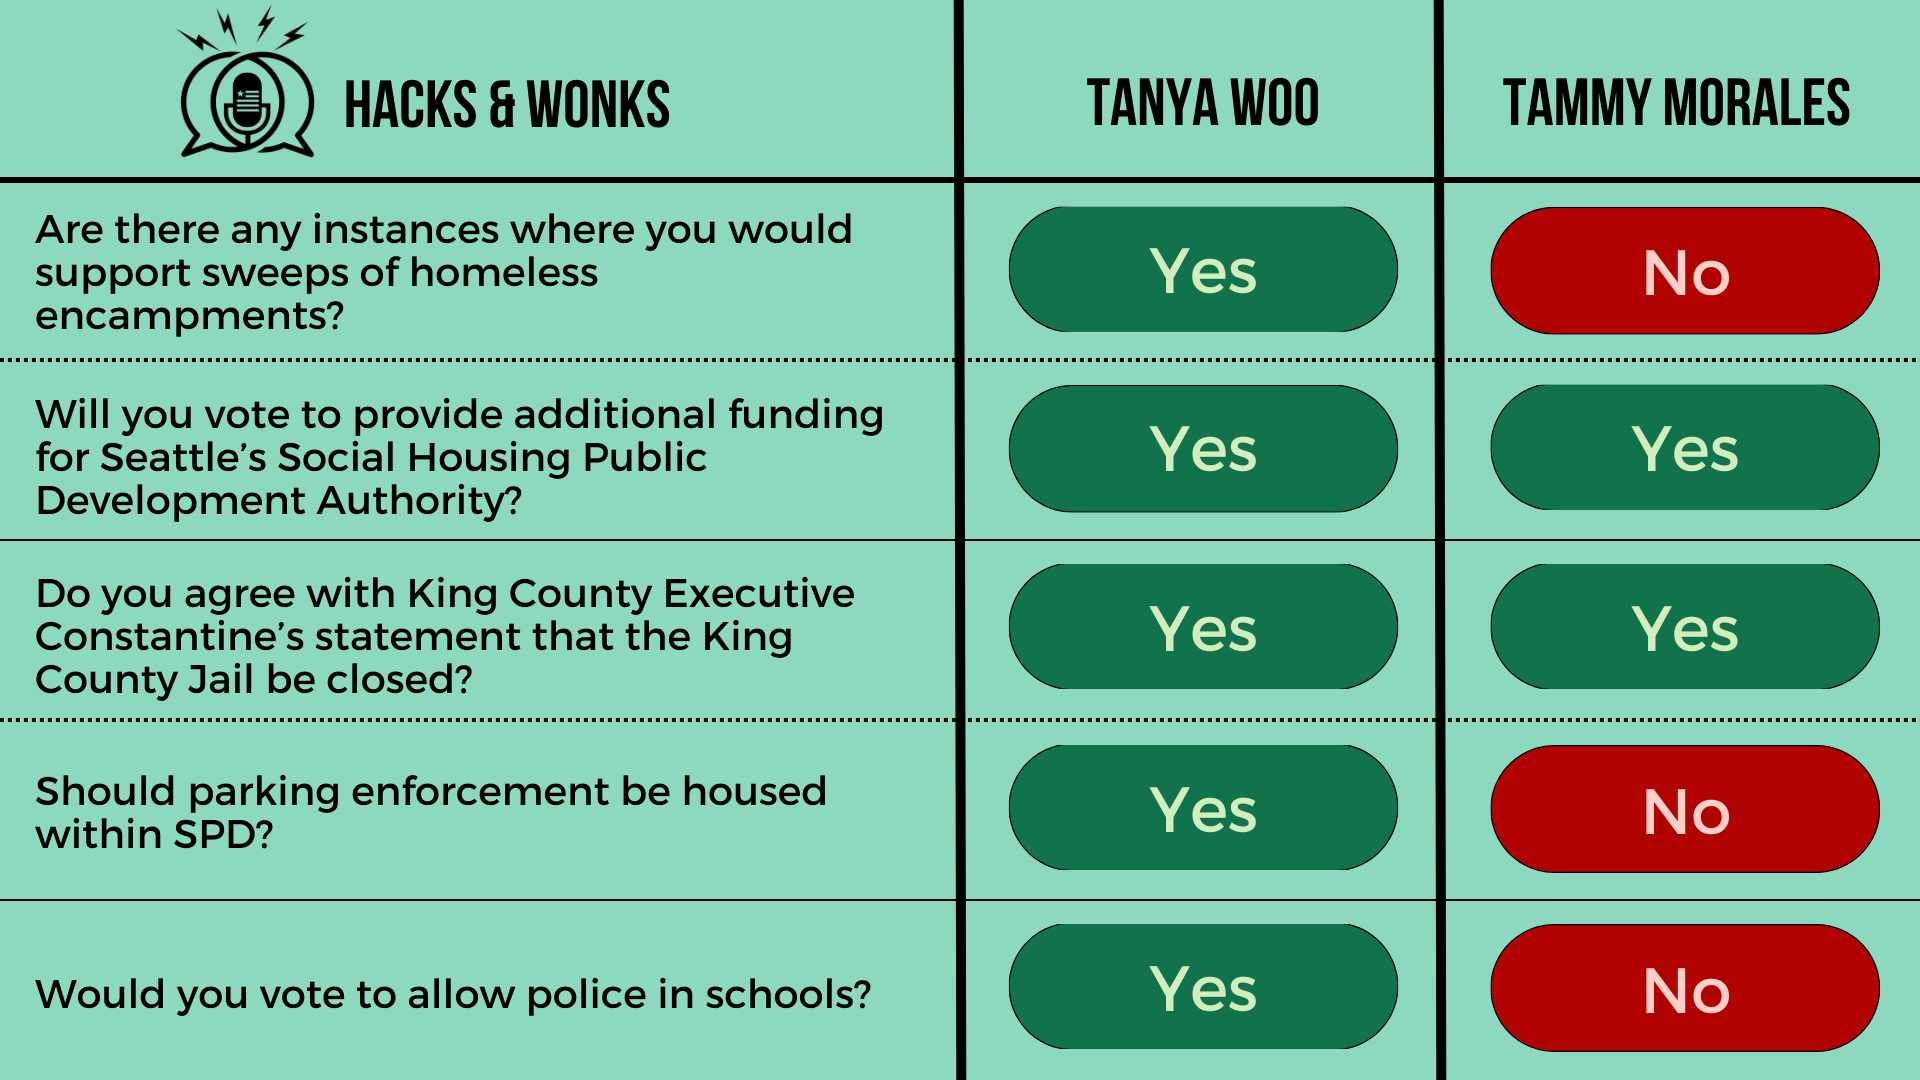 Q: Are there any instances where you would support sweeps of homeless encampments? Tanya Woo: Yes, Tammy Morales: No  Q: Will you vote to provide additional funding for Seattle’s Social Housing Public Development Authority? Tanya Woo: Yes, Tammy Mora